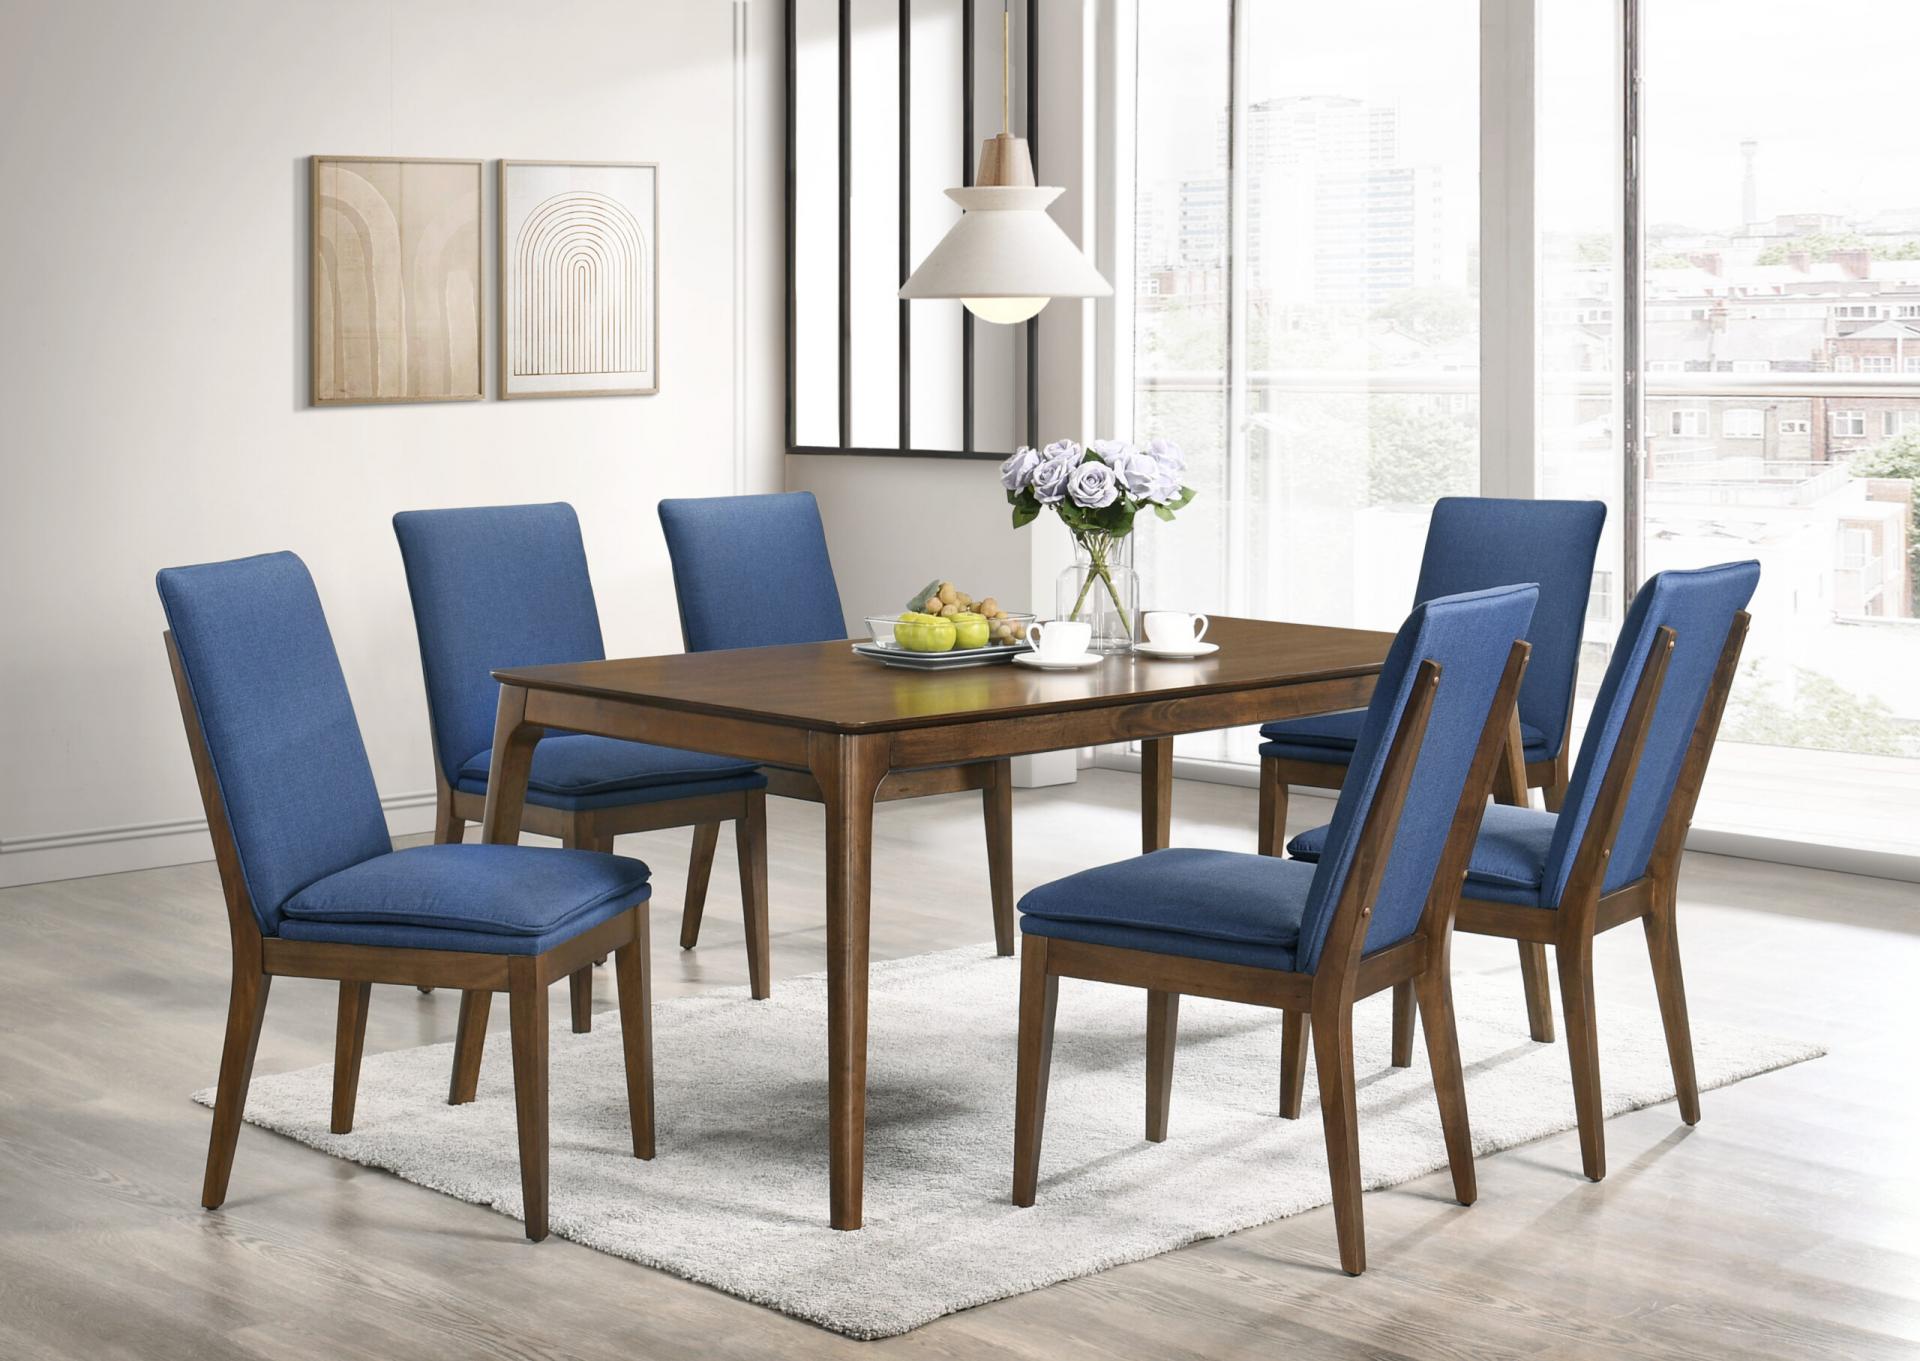 6 blue chairs with table